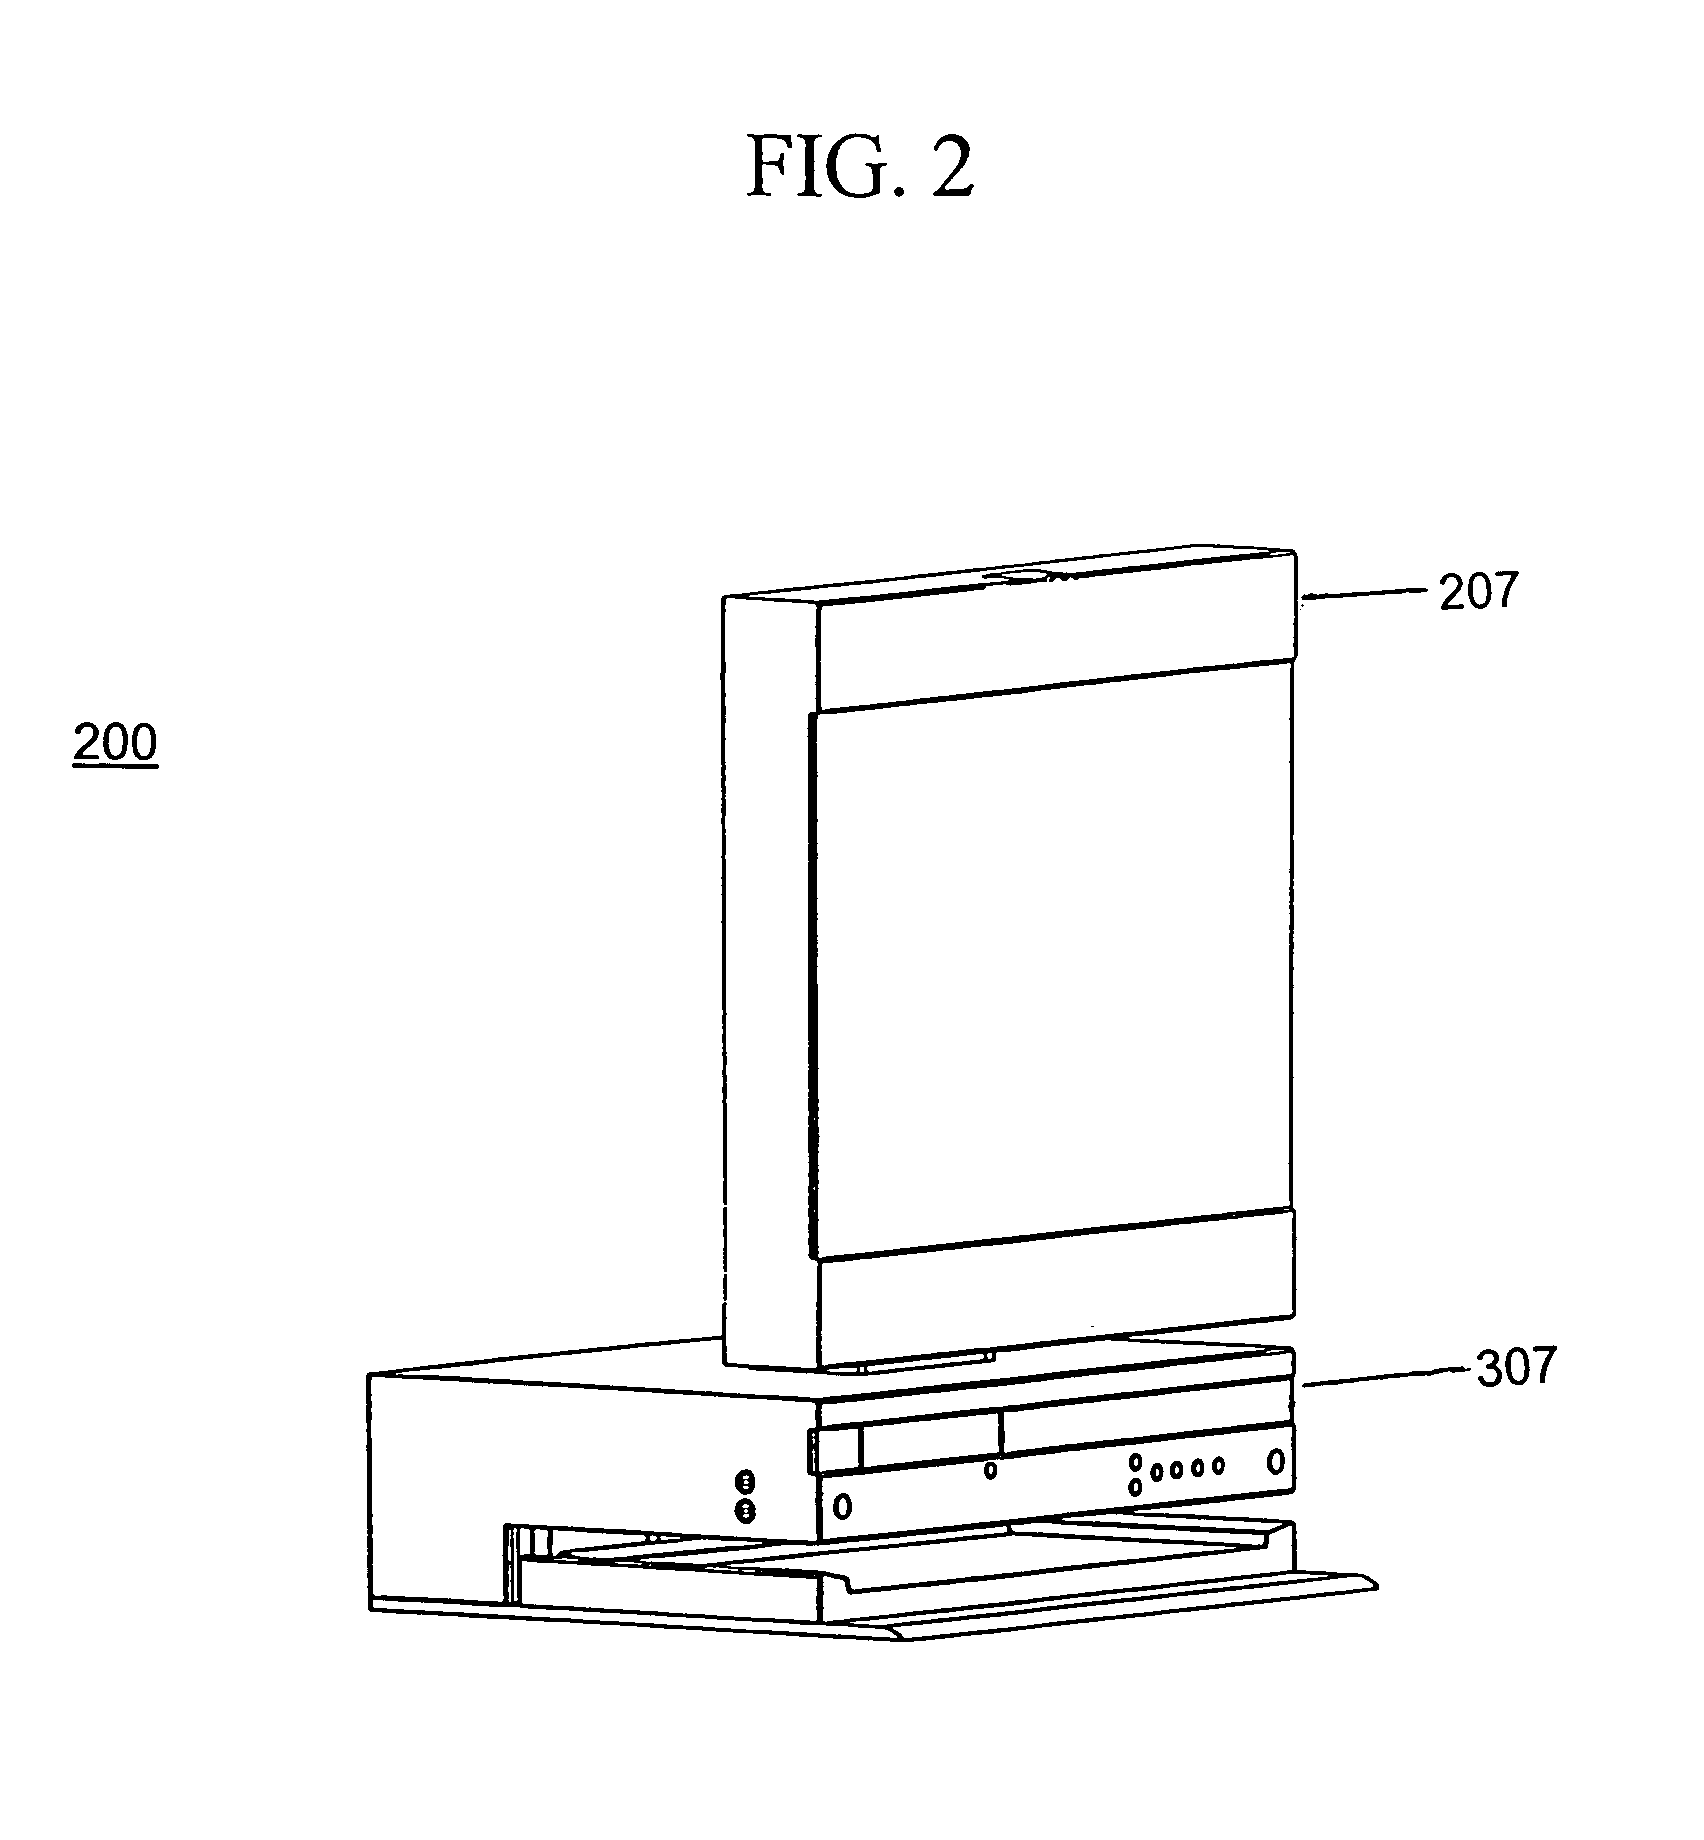 Auxiliary display unit for a computer system